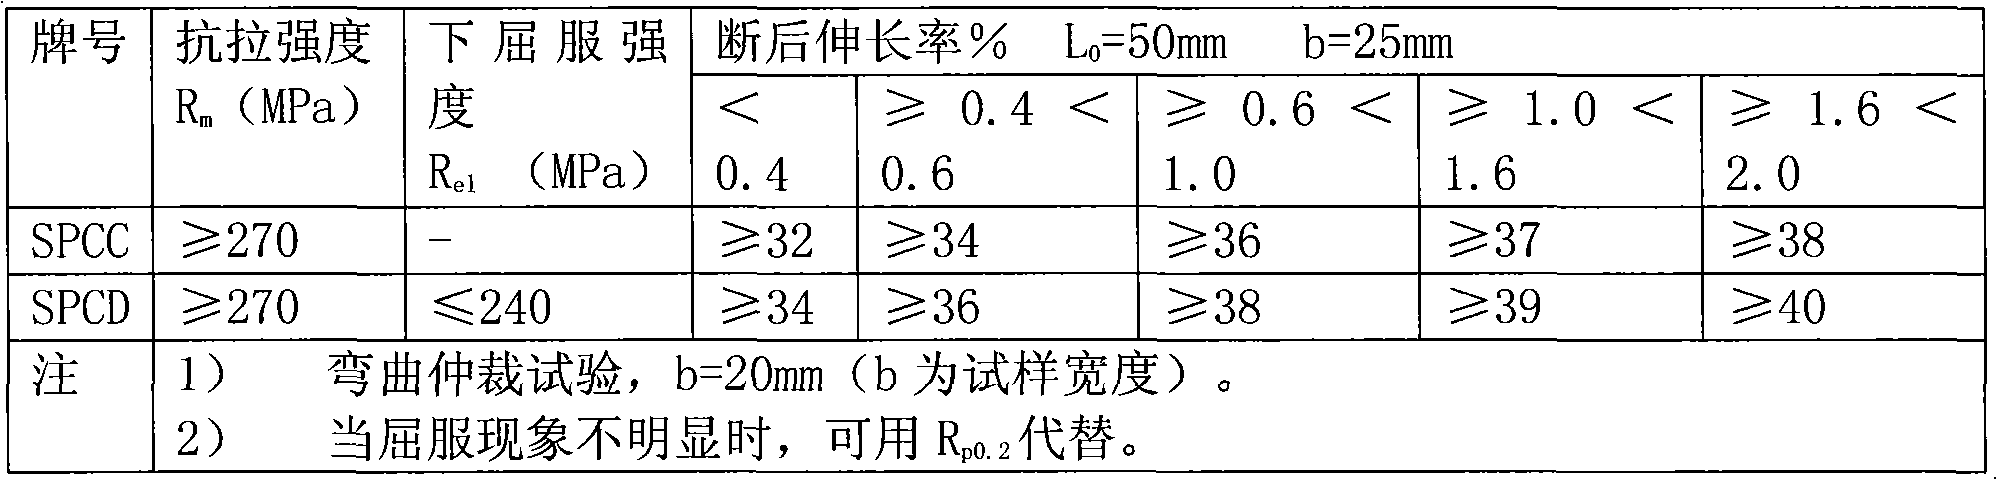 Anneal technique for producing SPCC steel grade with zincing wire annealing oven